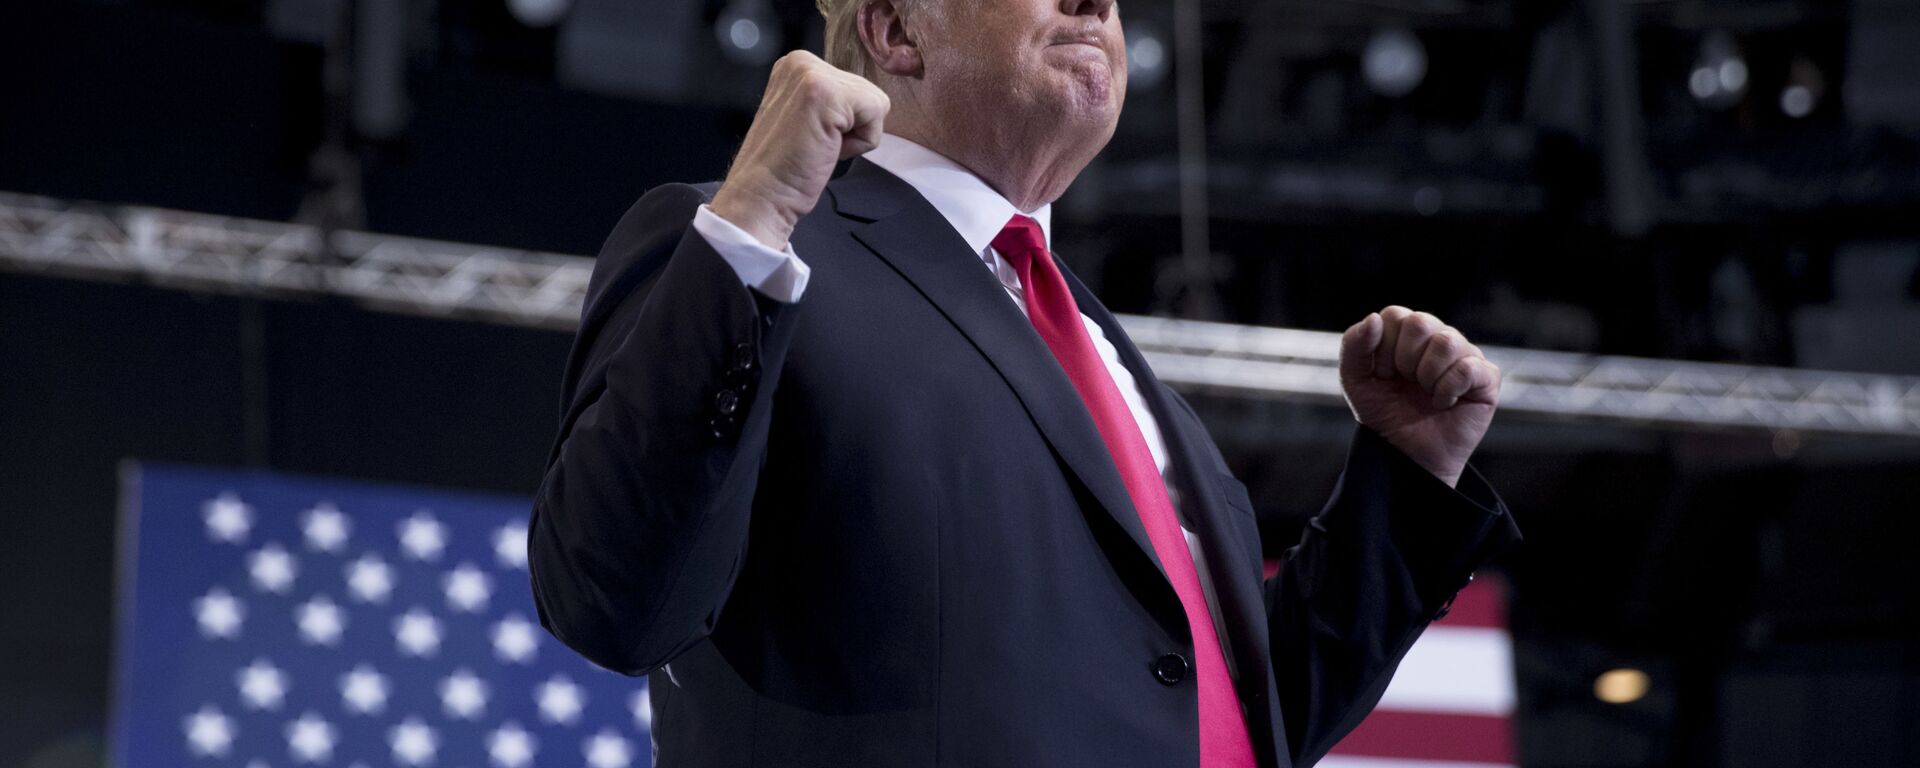 President Donald Trump shakes his fists as he finishes speaking at a rally at the Gaylord Opryland Resort and Convention Center, Tuesday, May 29, 2018, in Nashville, Tenn - Sputnik International, 1920, 09.10.2020